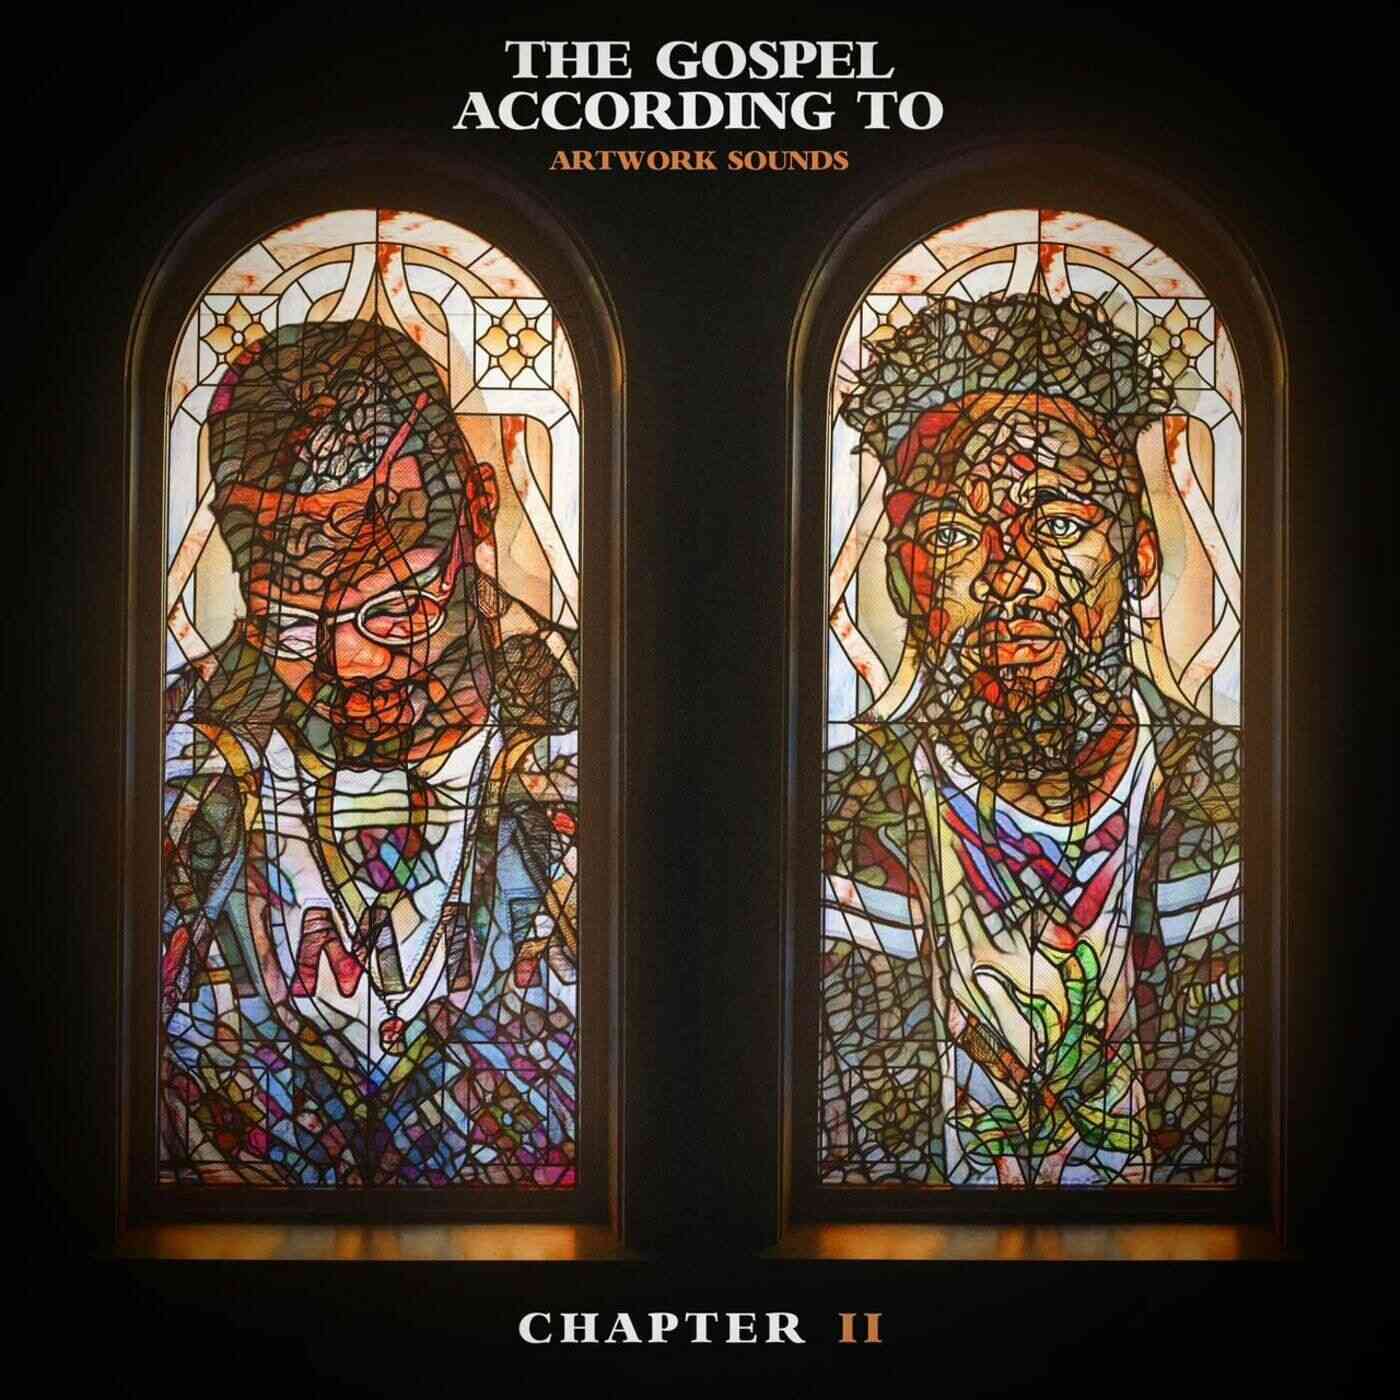 Artwork Sounds Deliver The Disc 2 of The Gospel According To Artwork Sounds Chapter II